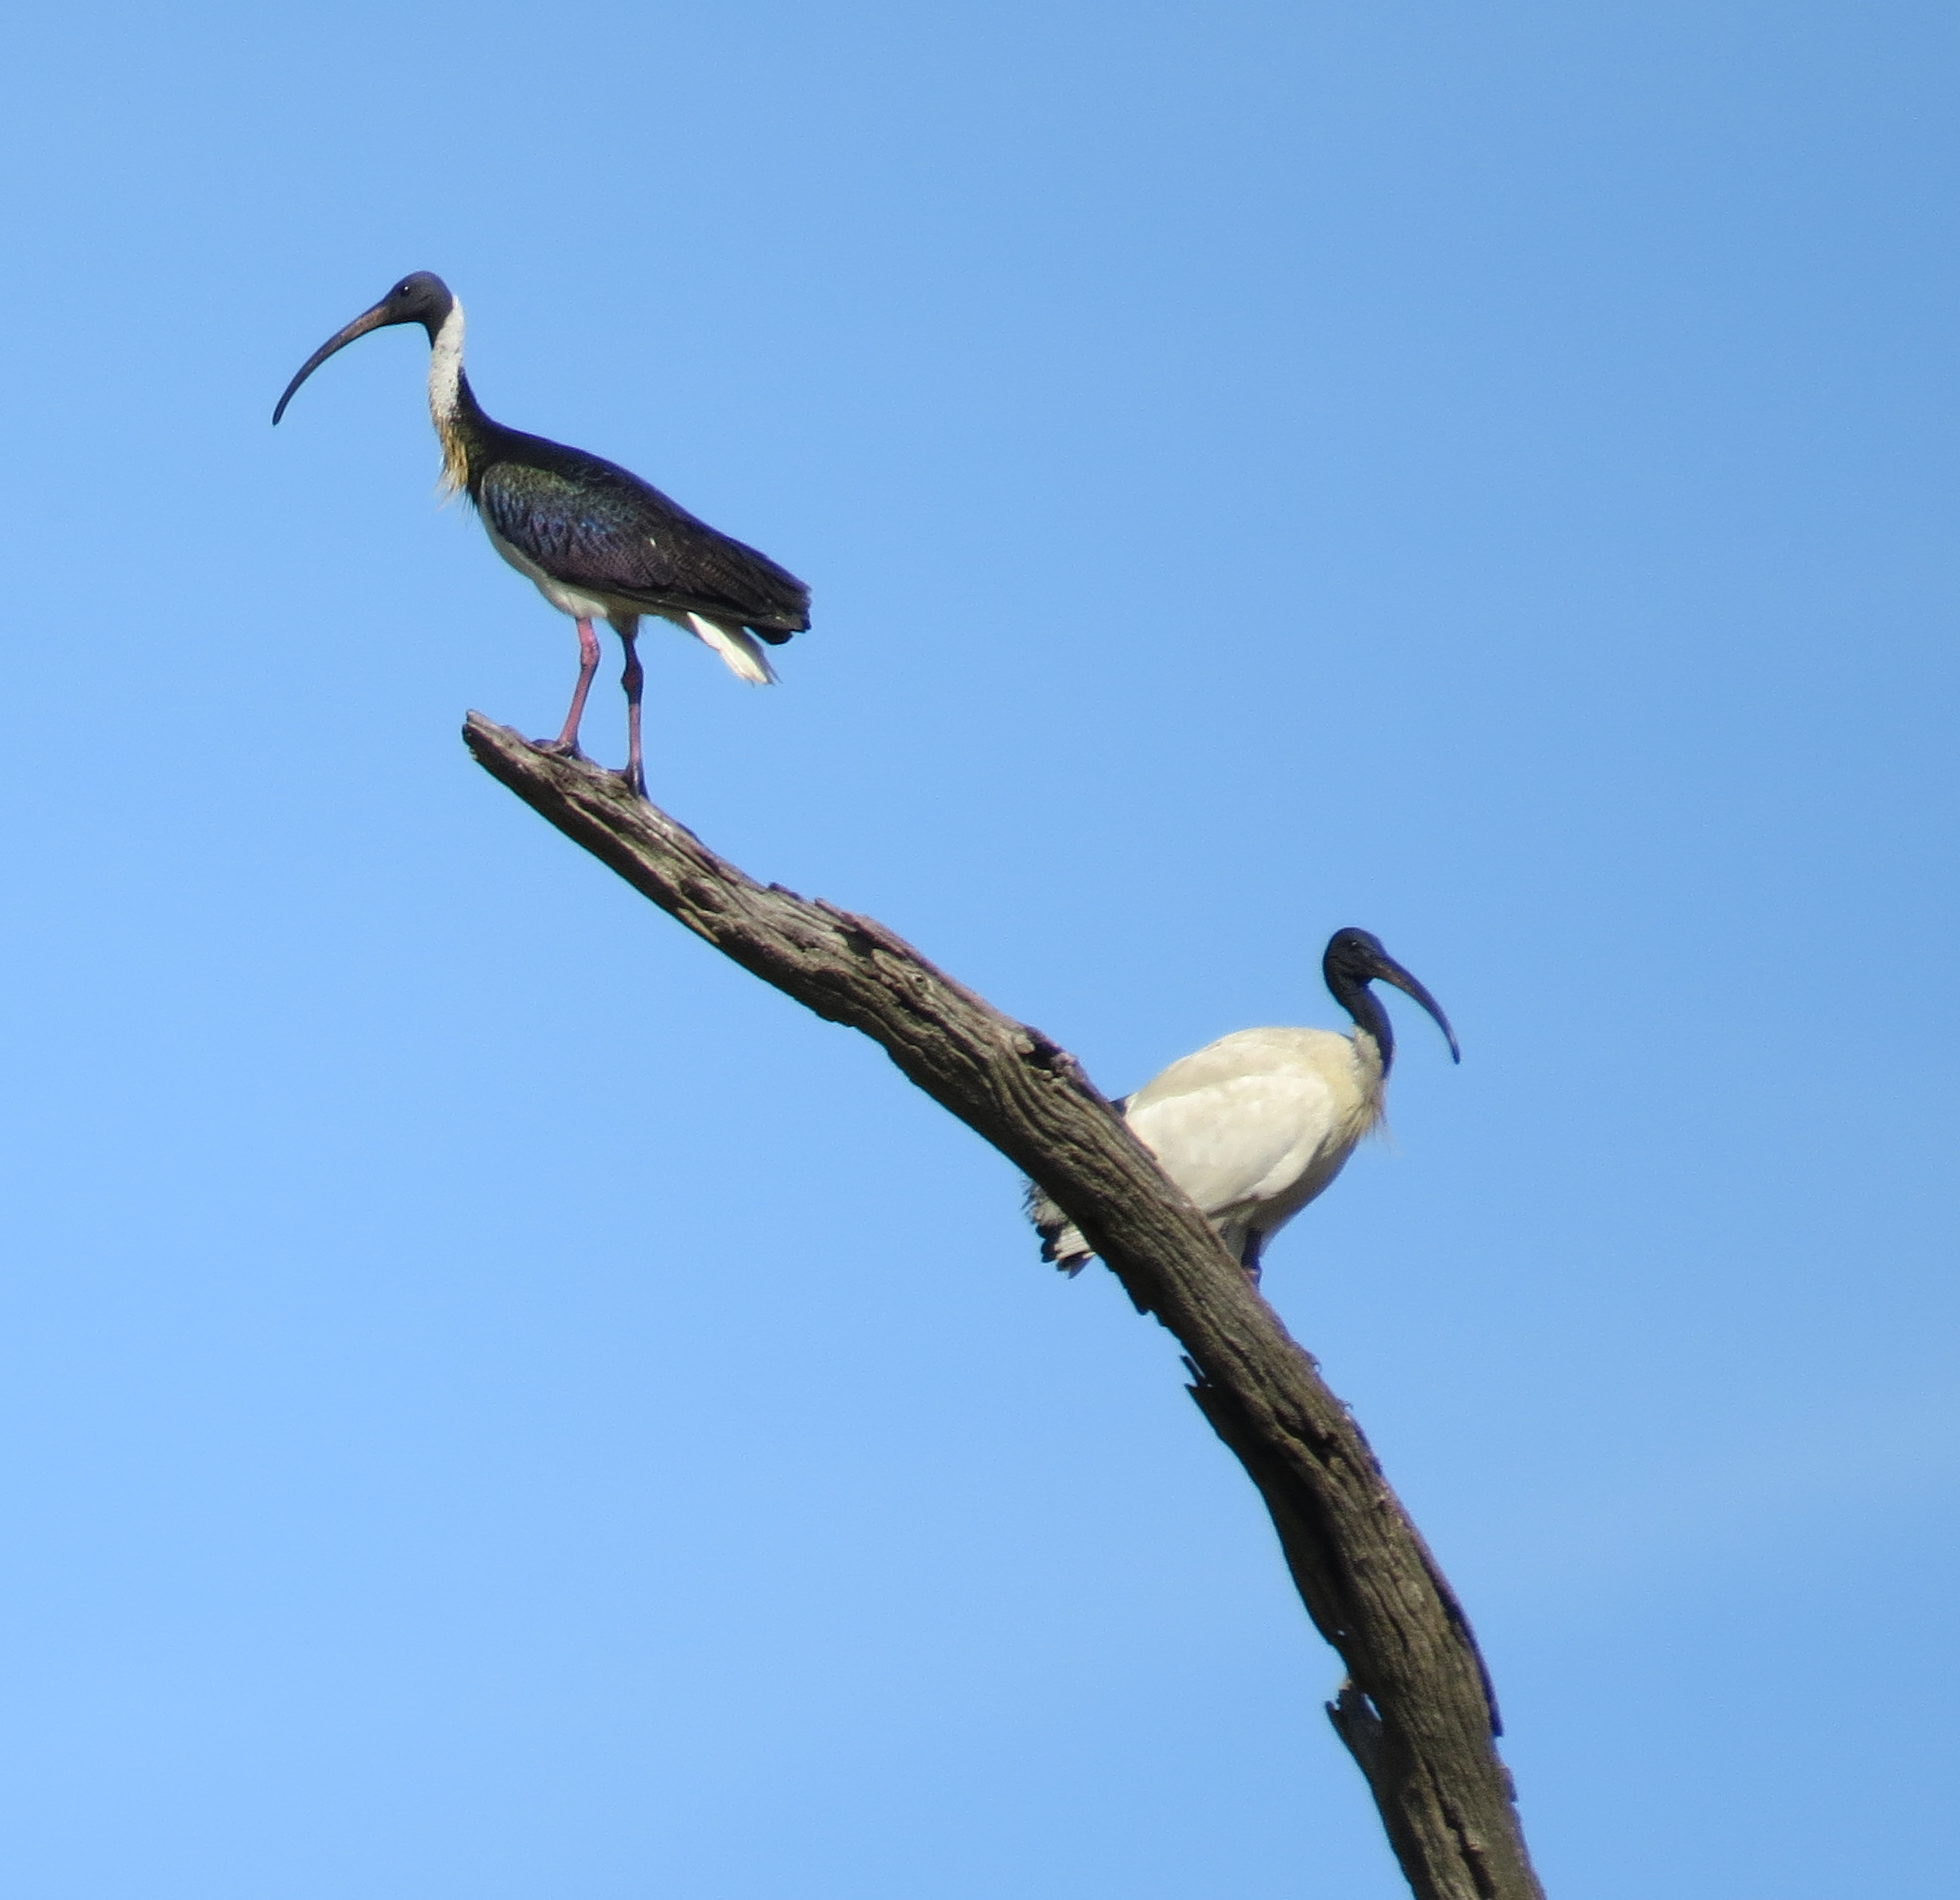 A straw-necked ibis on the left of a branch and a white ibis on the right of the branch. The straw-necked ibis is mostly black and the white ibis is mostly white